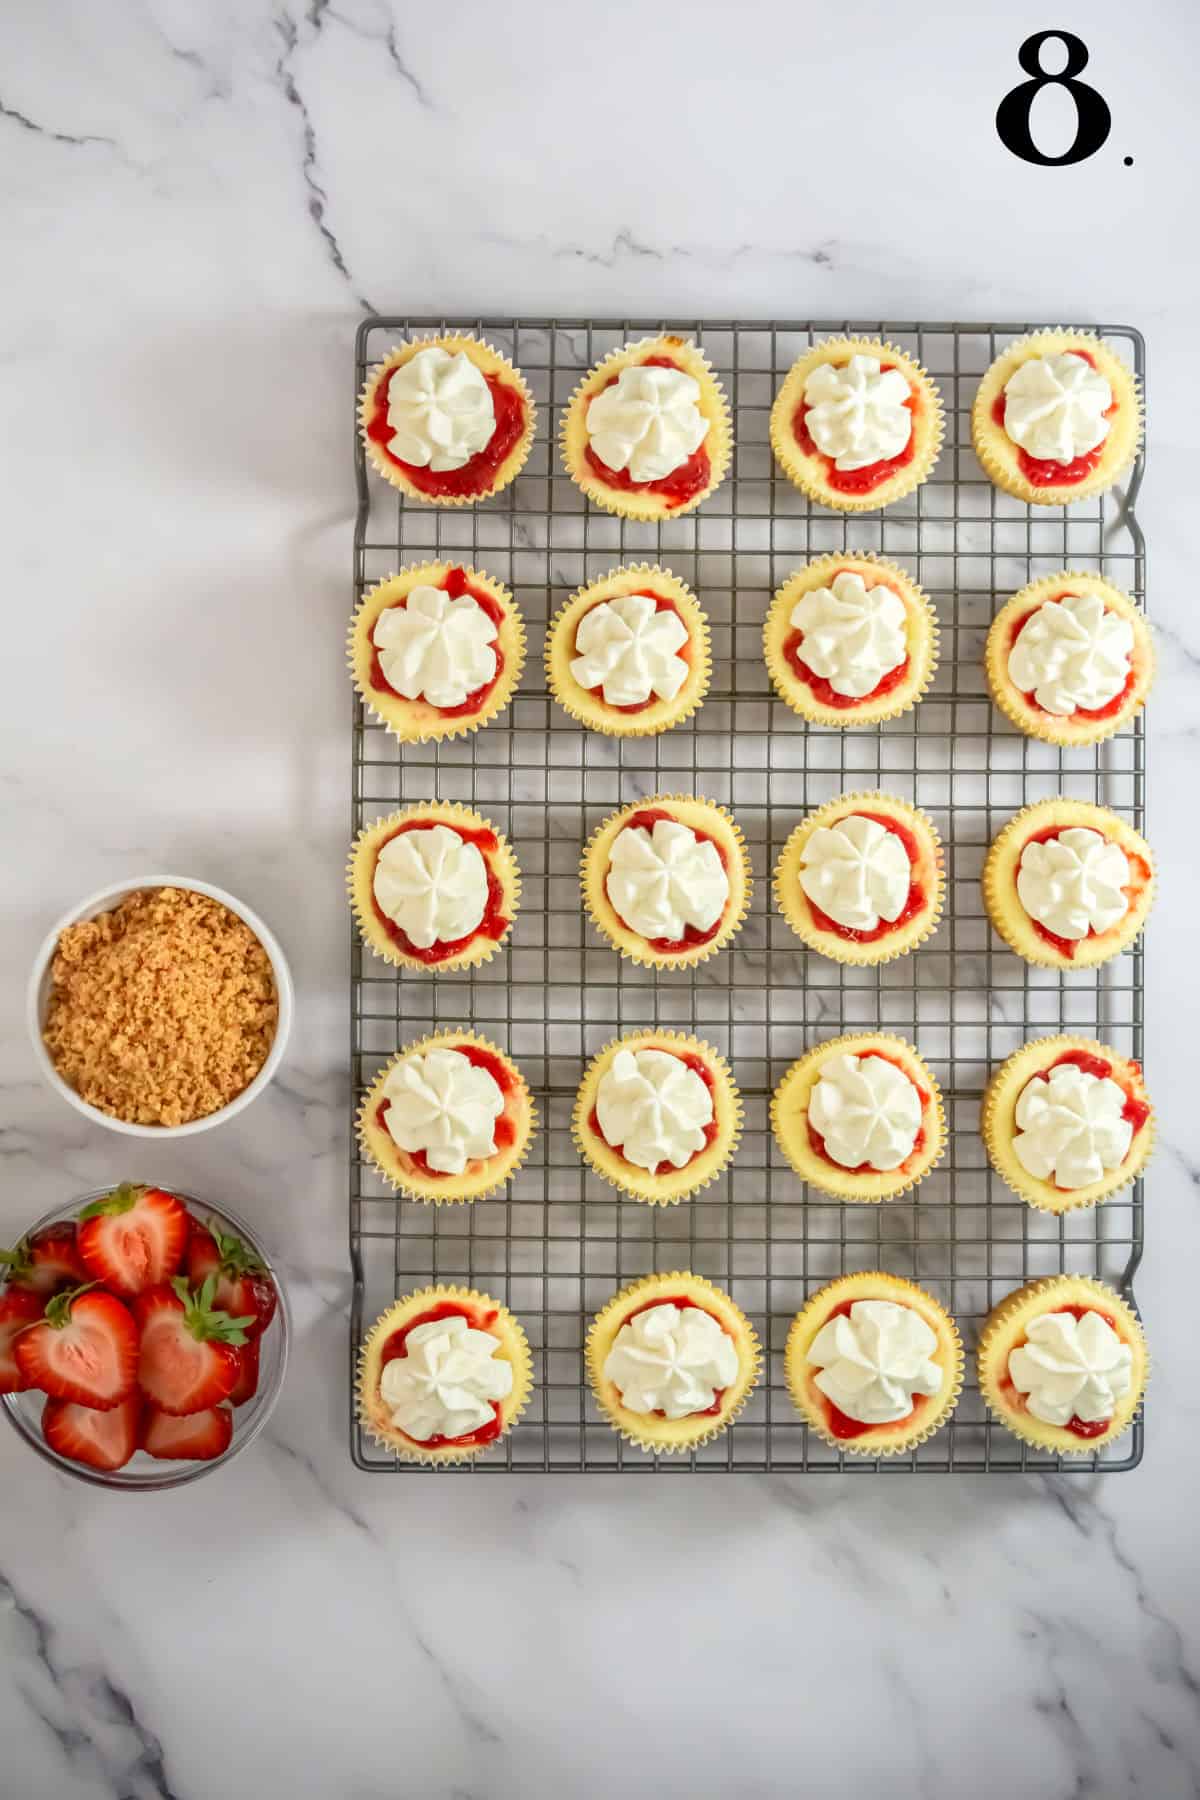 How to Make Strawberry Crunch Mini Cheesecakes - Step 8 adding whipped topping.